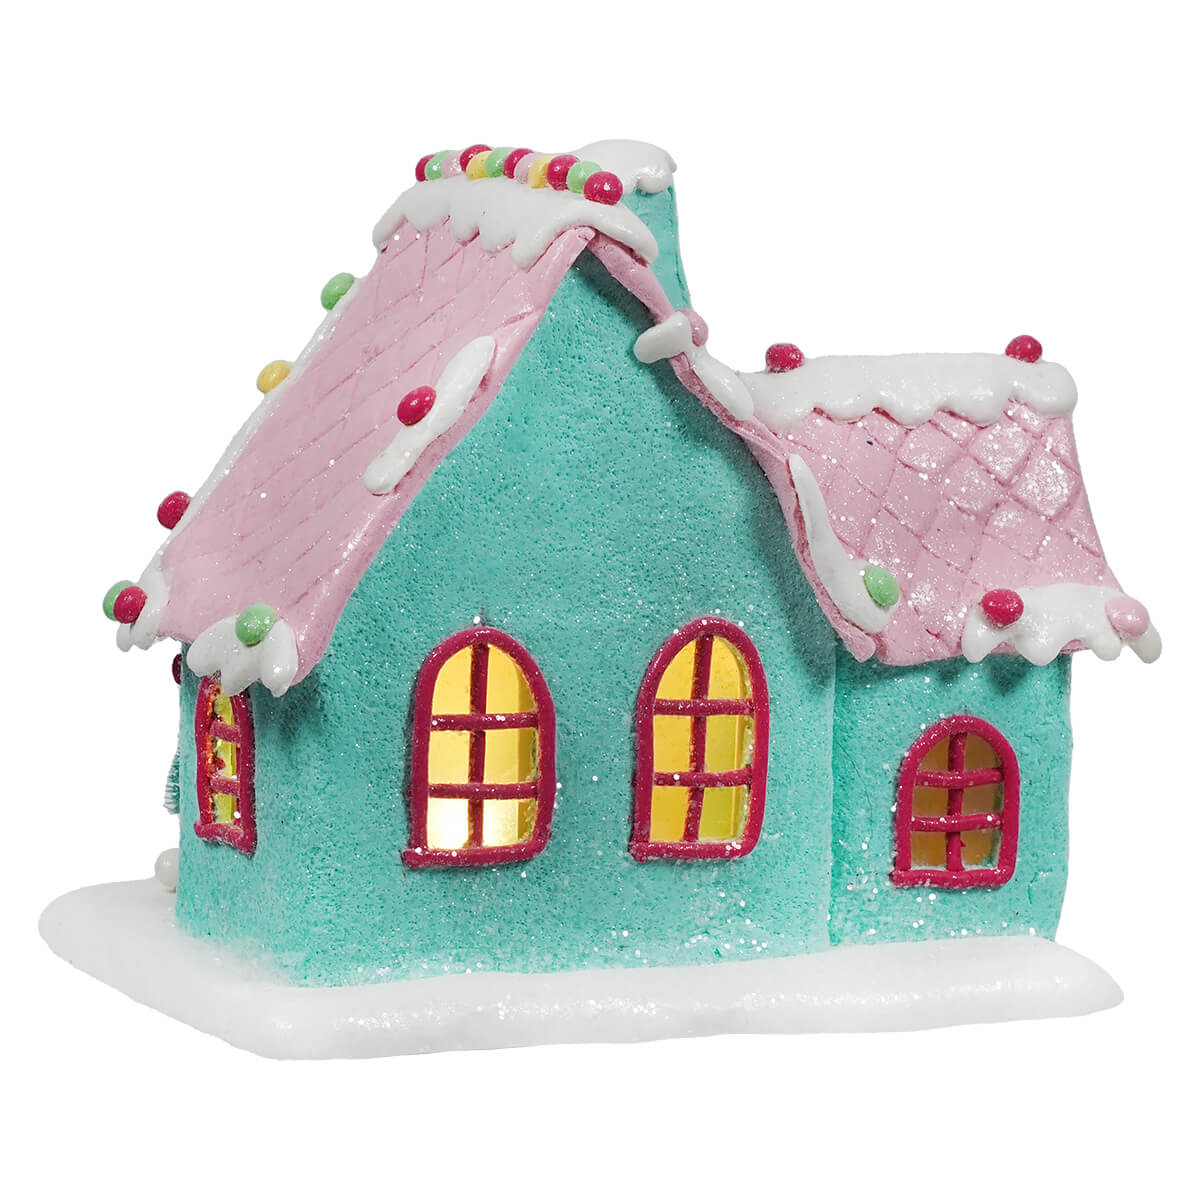 Lighted Claydough Pastel Gingerbread House